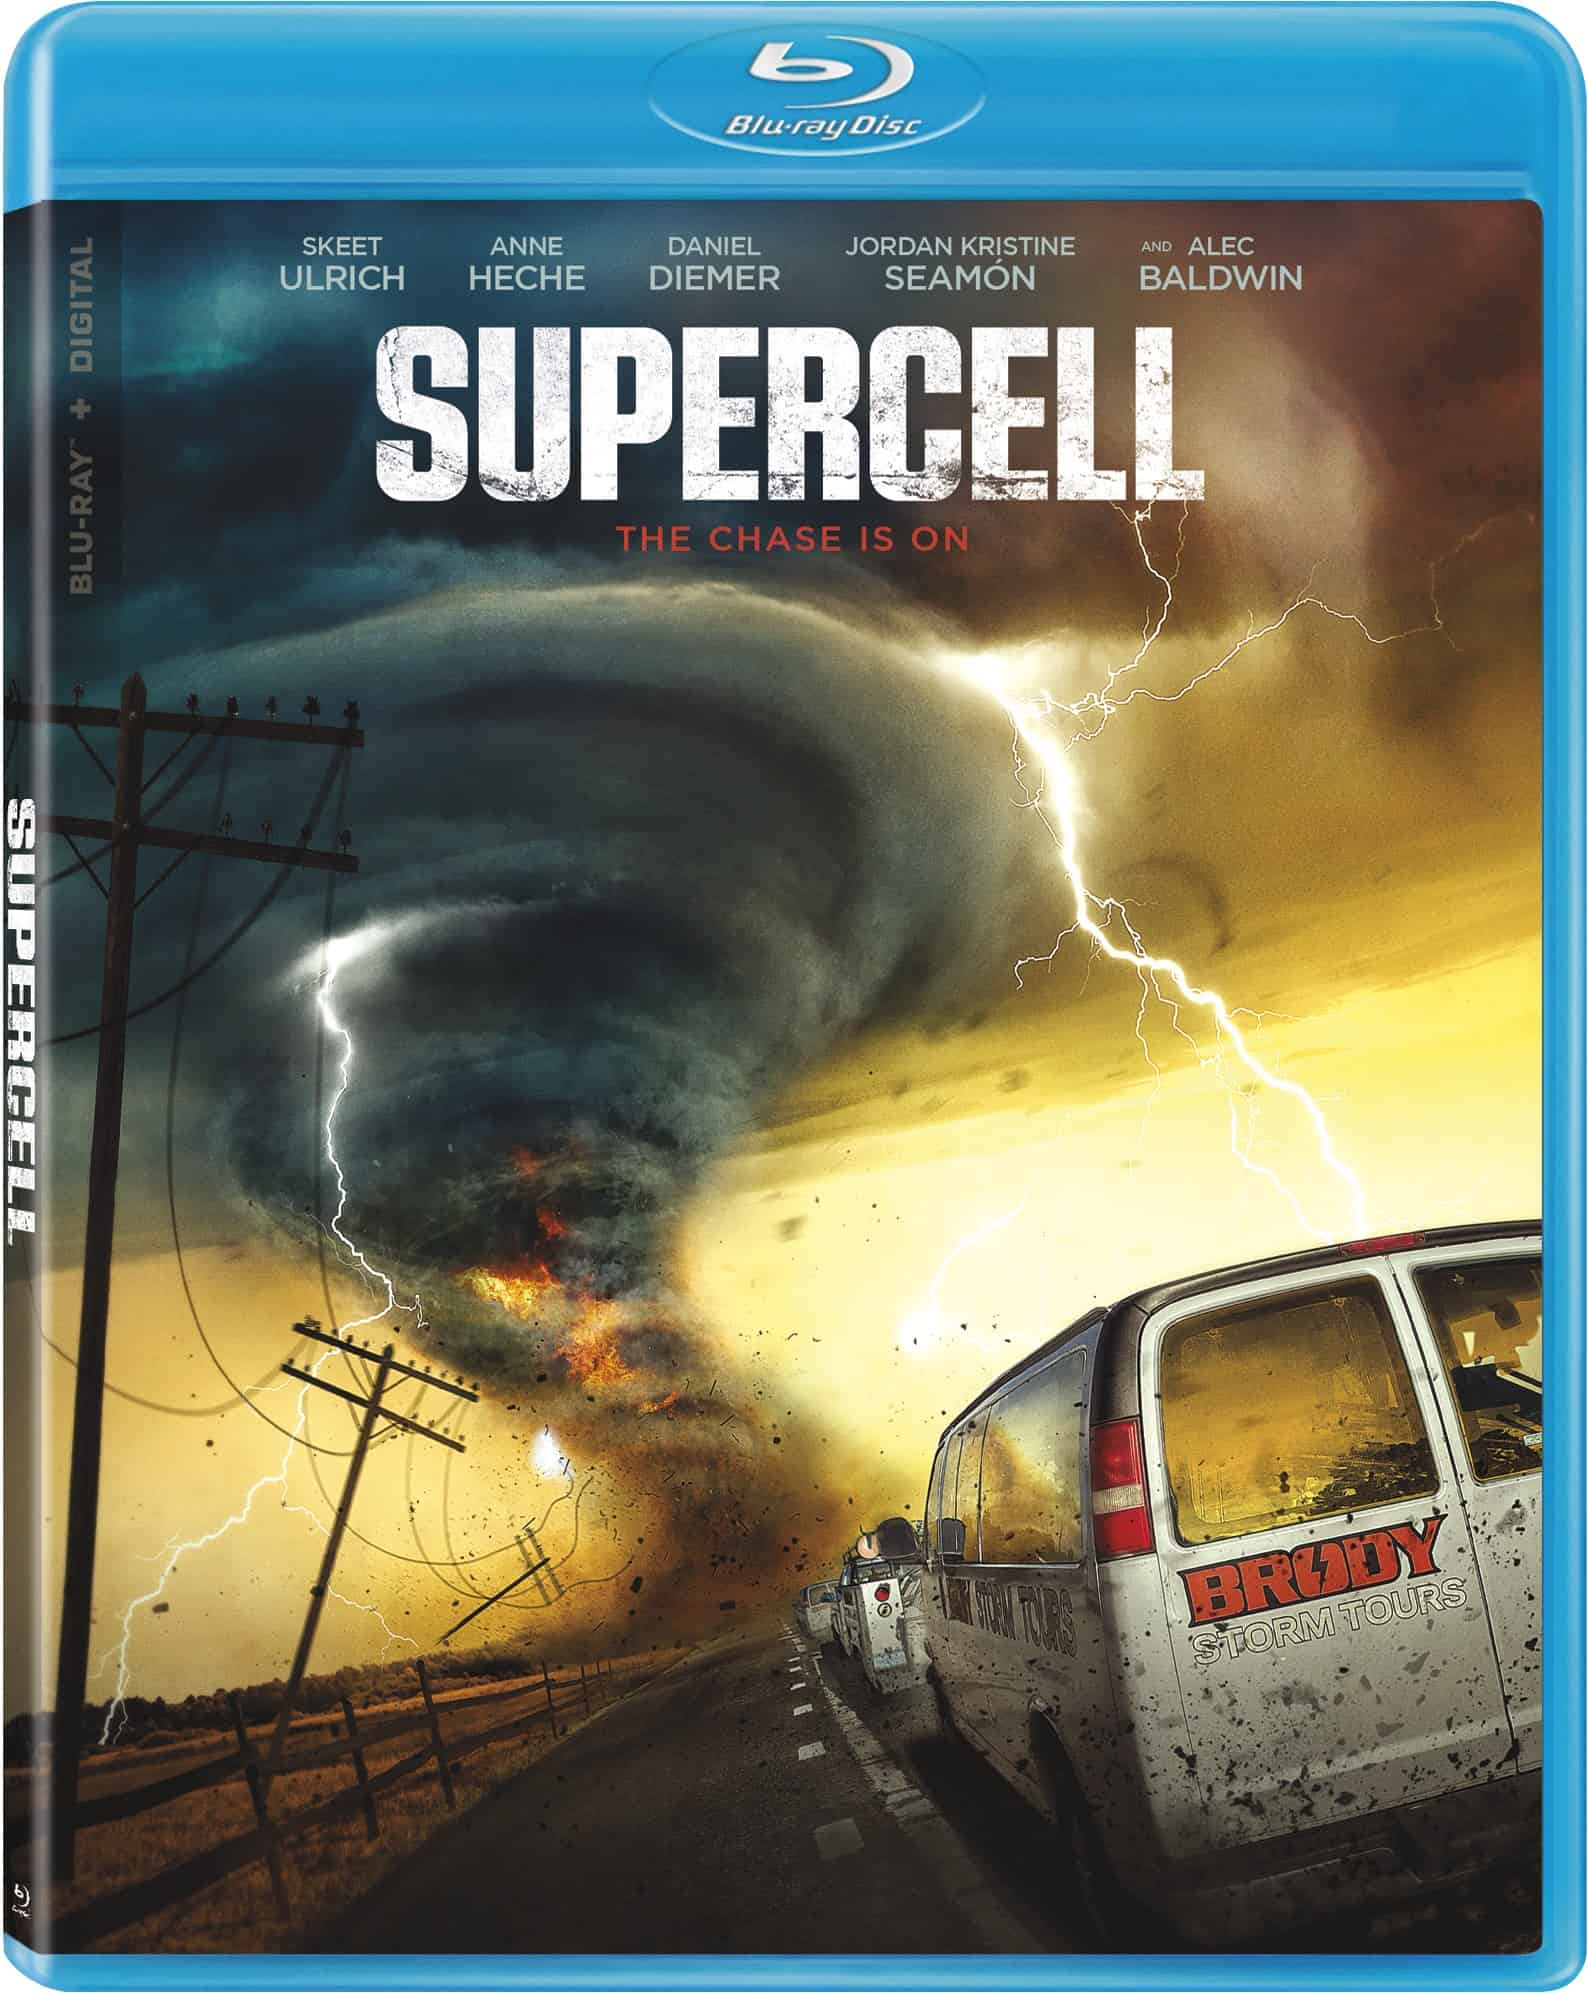 Supercell comes to Blu-ray on May 2nd 25